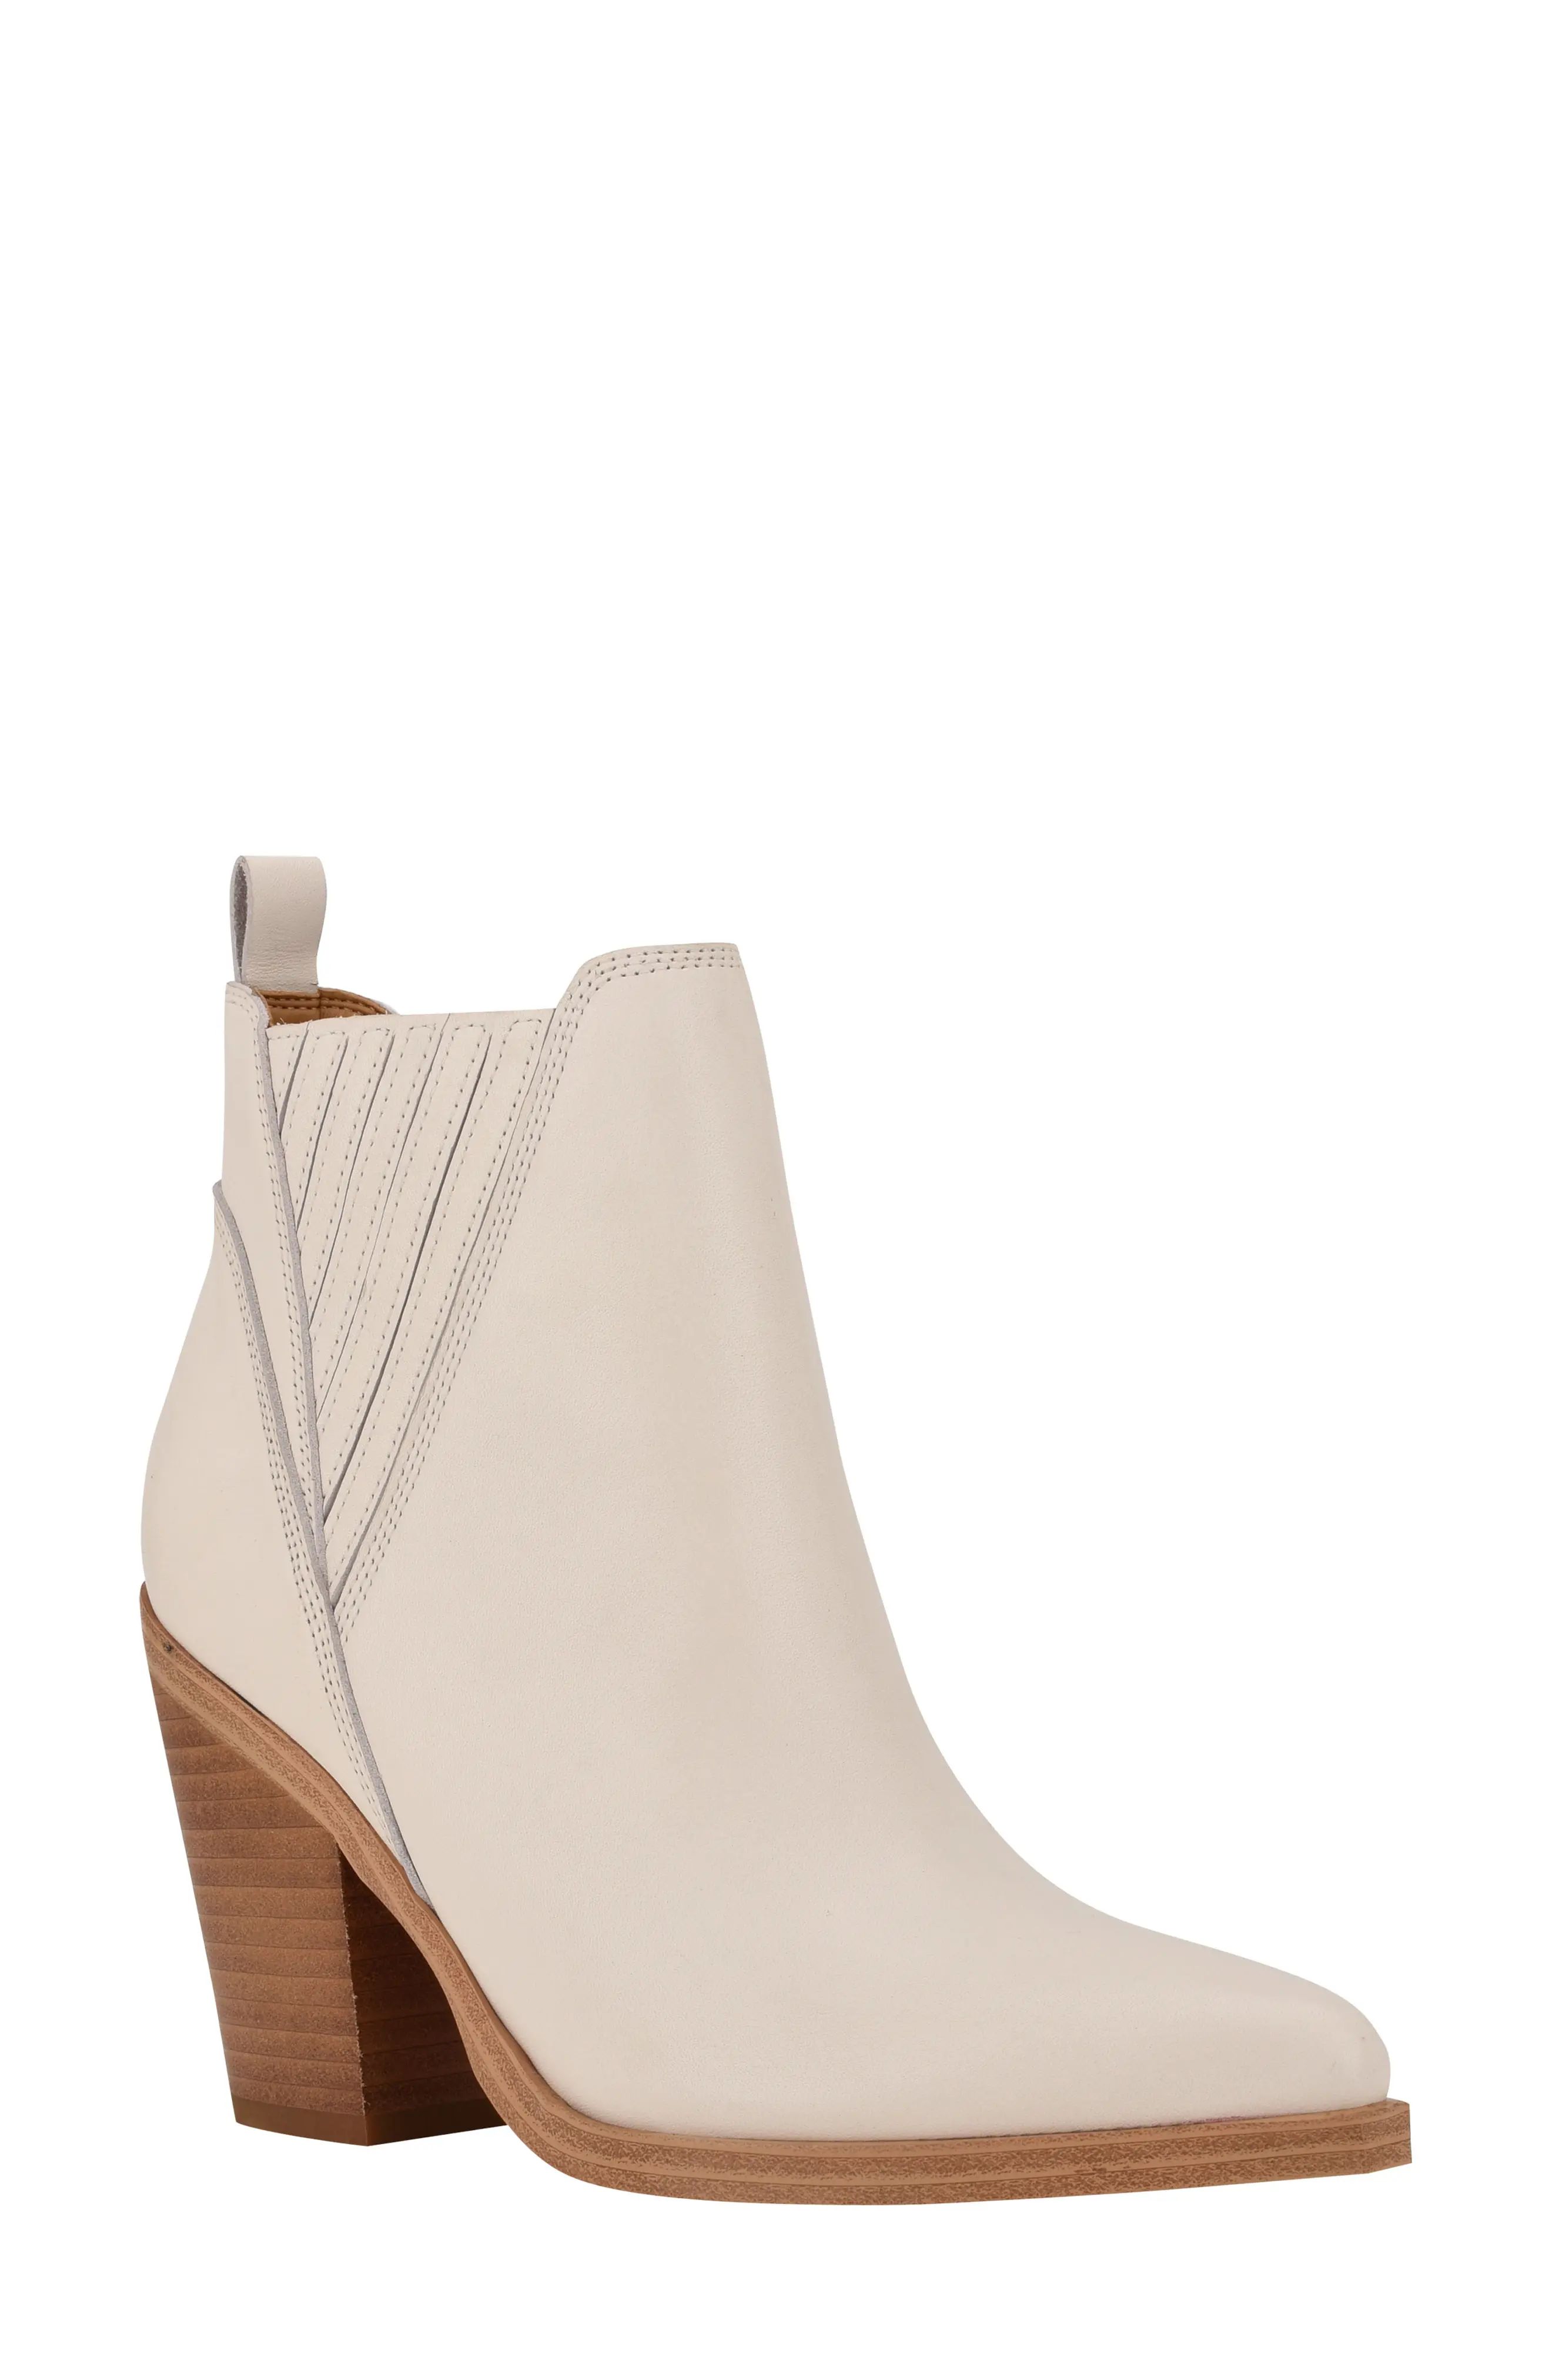 Marc Fisher LTD Gadri Pointed Toe Bootie, Size 9.5 in Chic Cream Leather at Nordstrom | Nordstrom